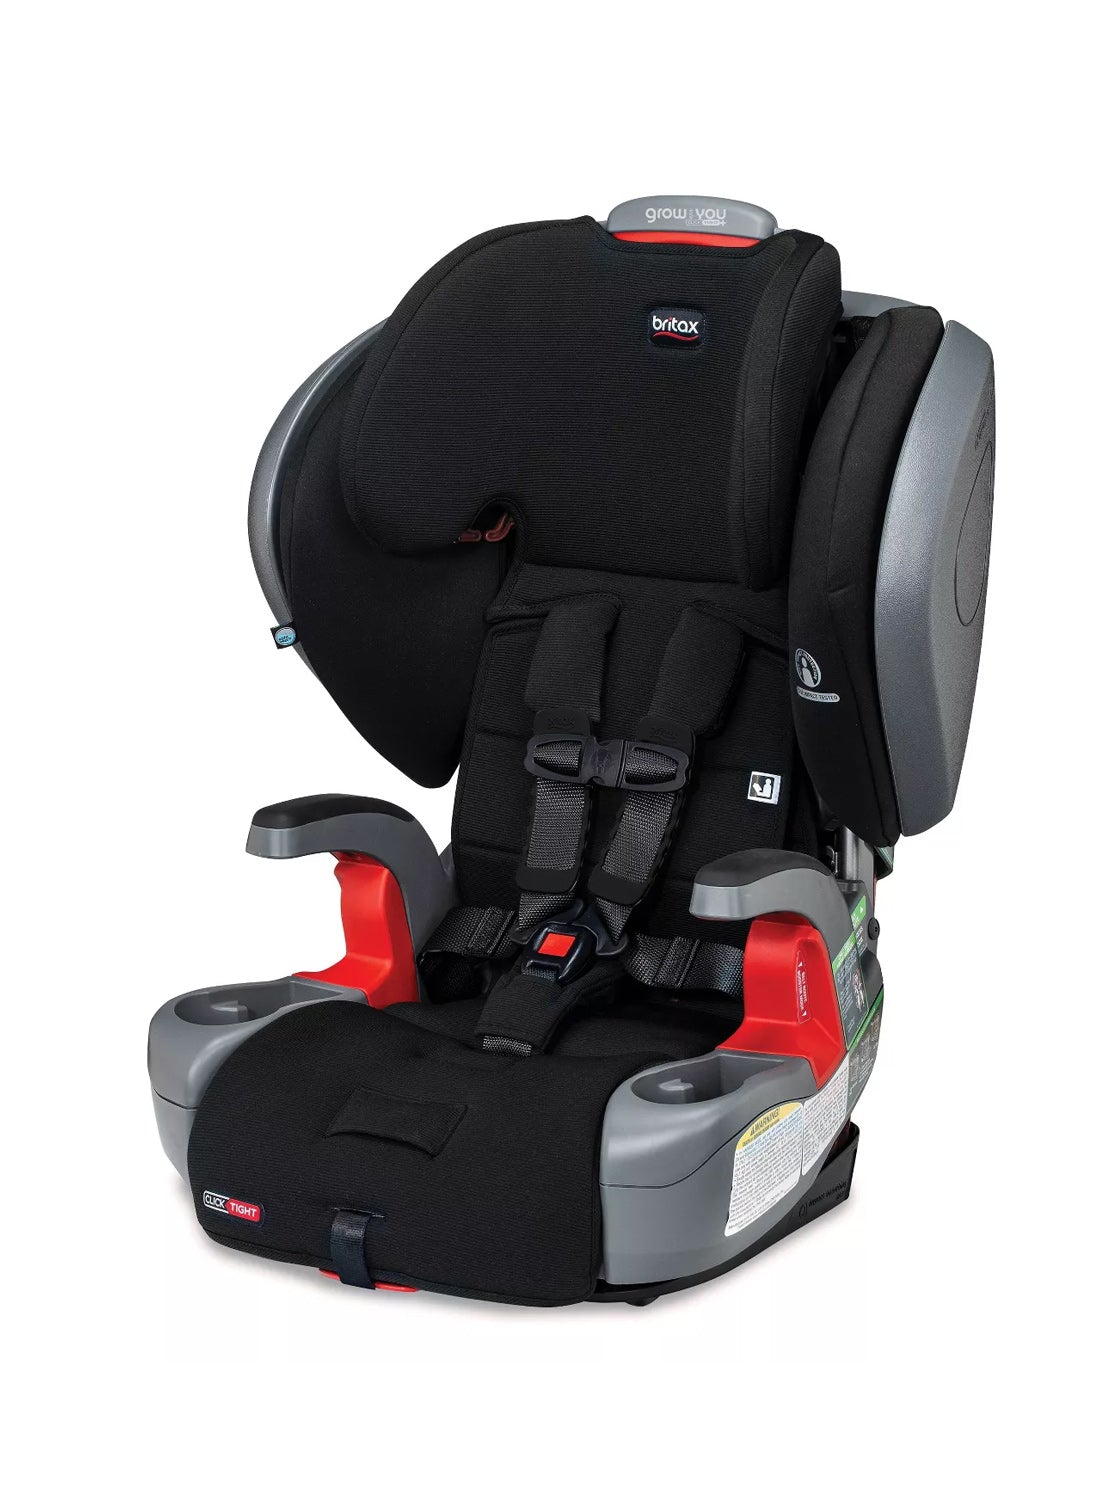 BRITAX Grow With You Harness-to-Booster Seat with ClickTight + Safewash - ANB Baby -$300 - $500